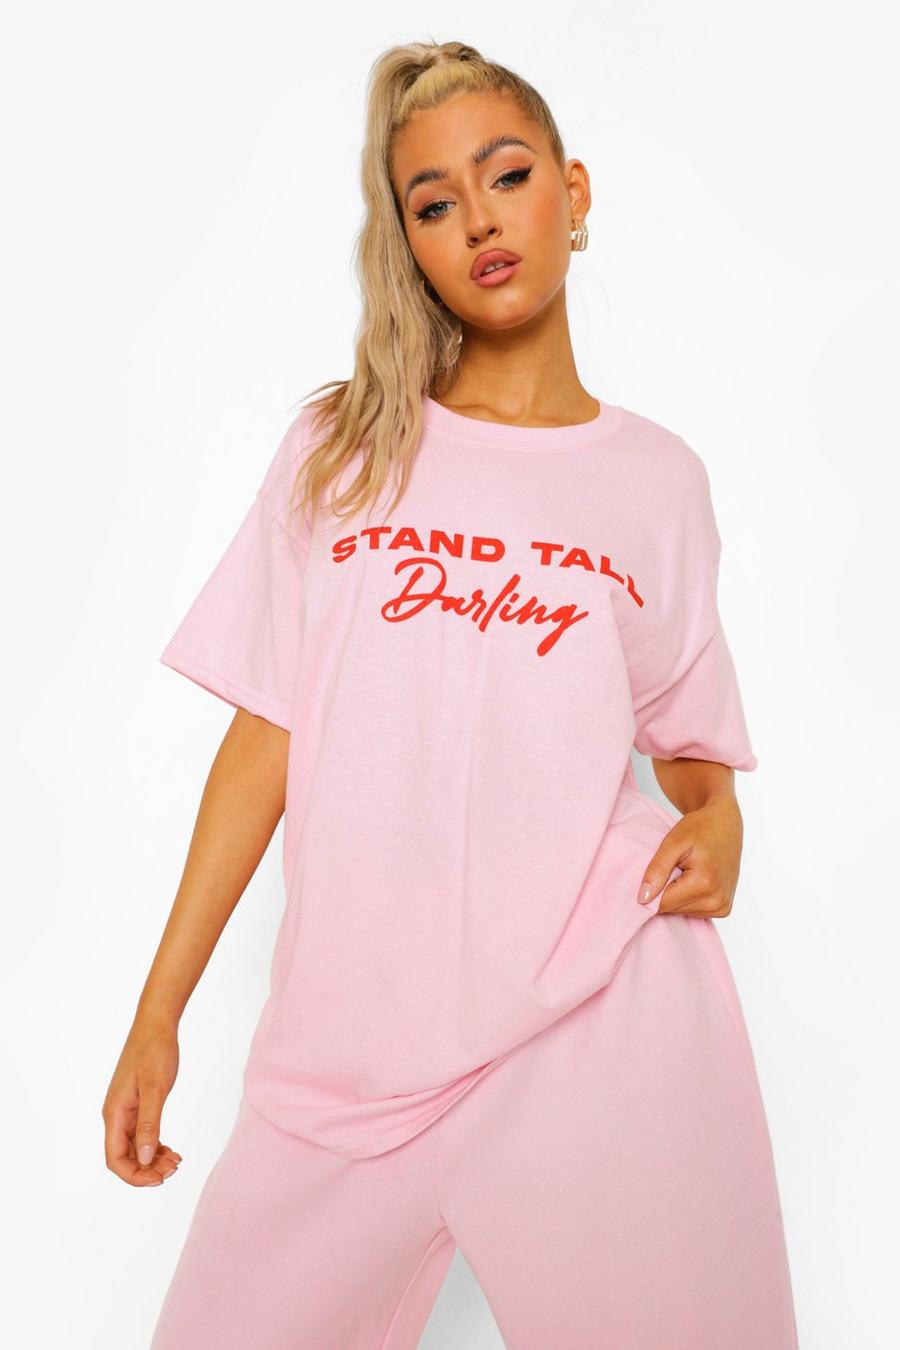 Camiseta con eslogan “Stand Tall” Tall, Rosa claro image number 1